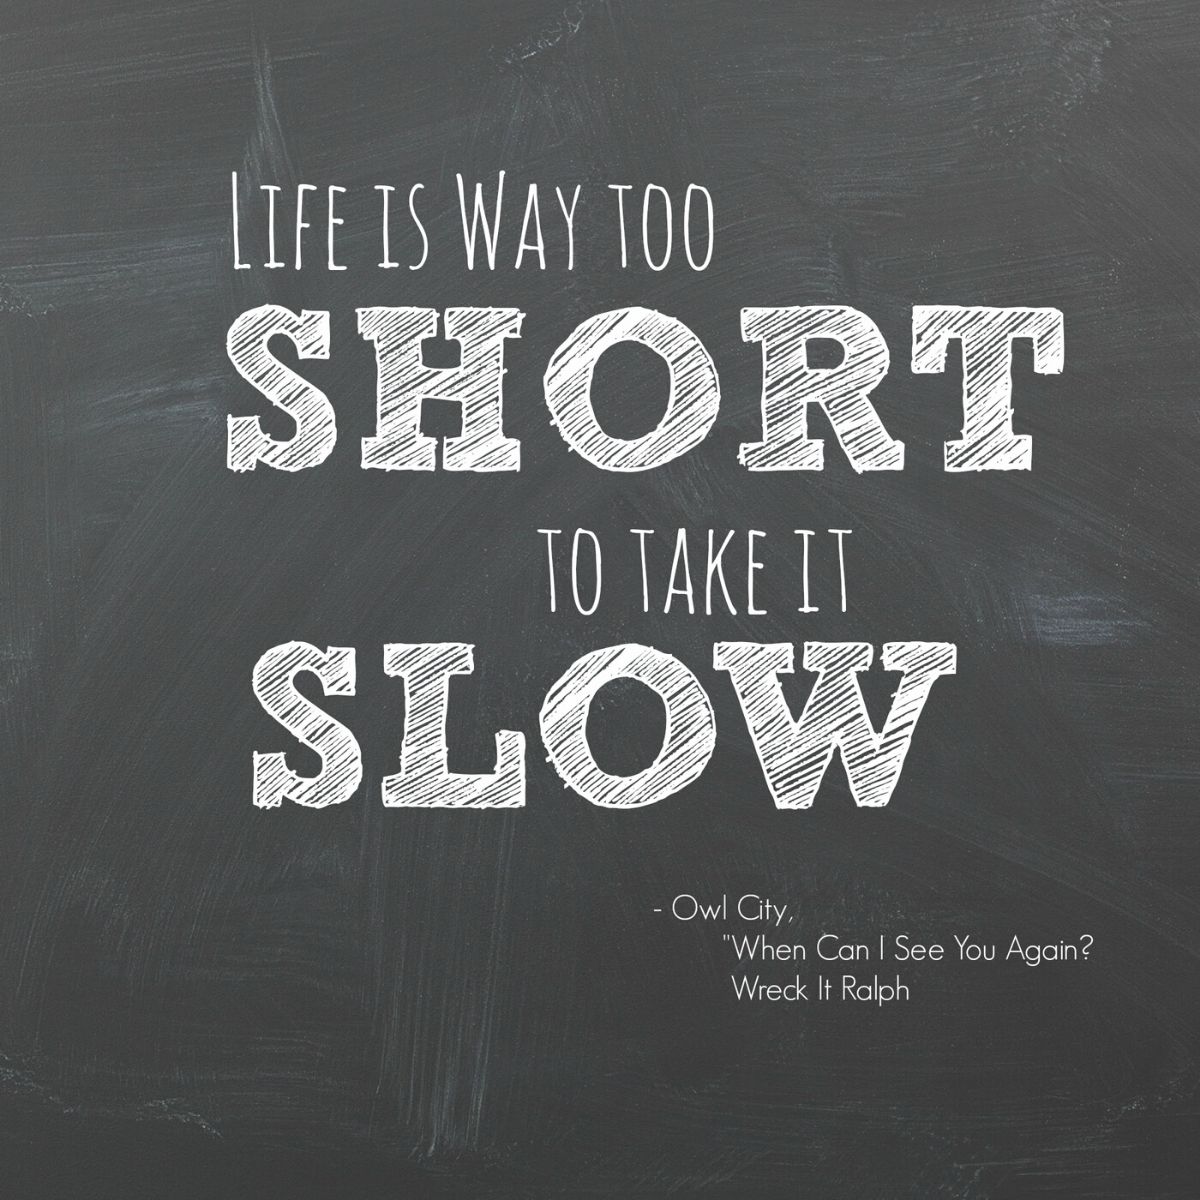 Quote says: Life is Way Too Short to Take It Slow